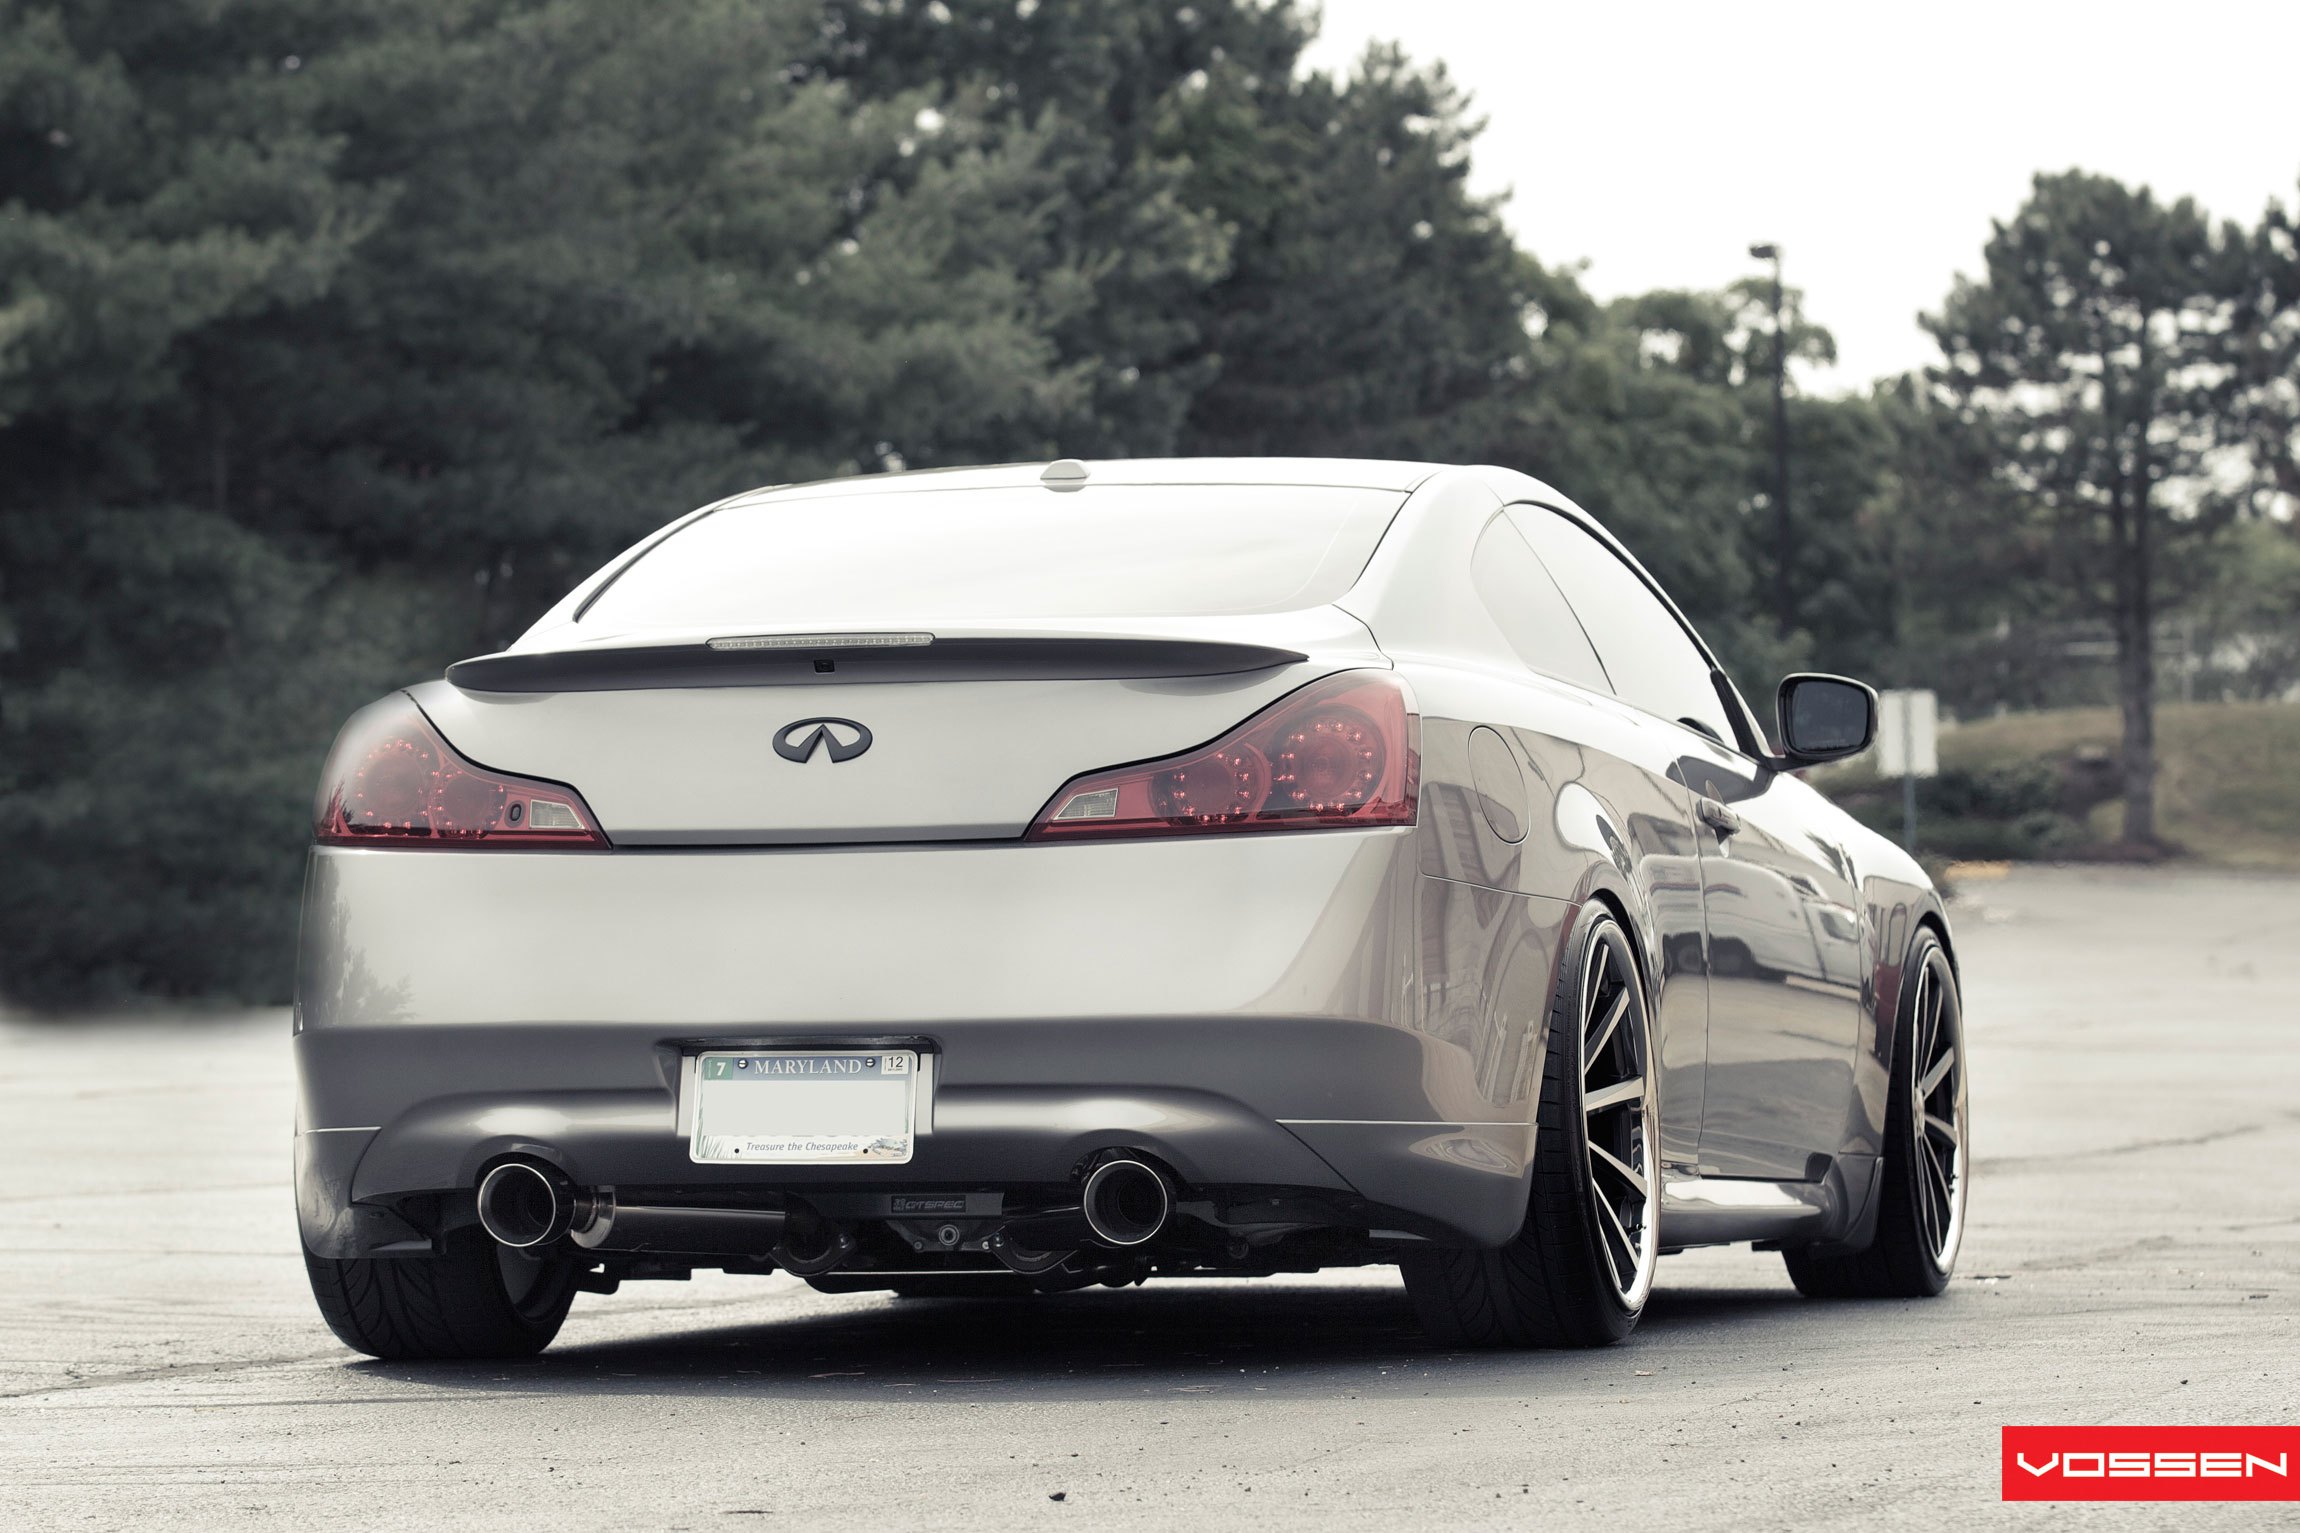 Aftermarket LED Taillights on Silver Metallic Infiniti G37 - Photo by Vossen